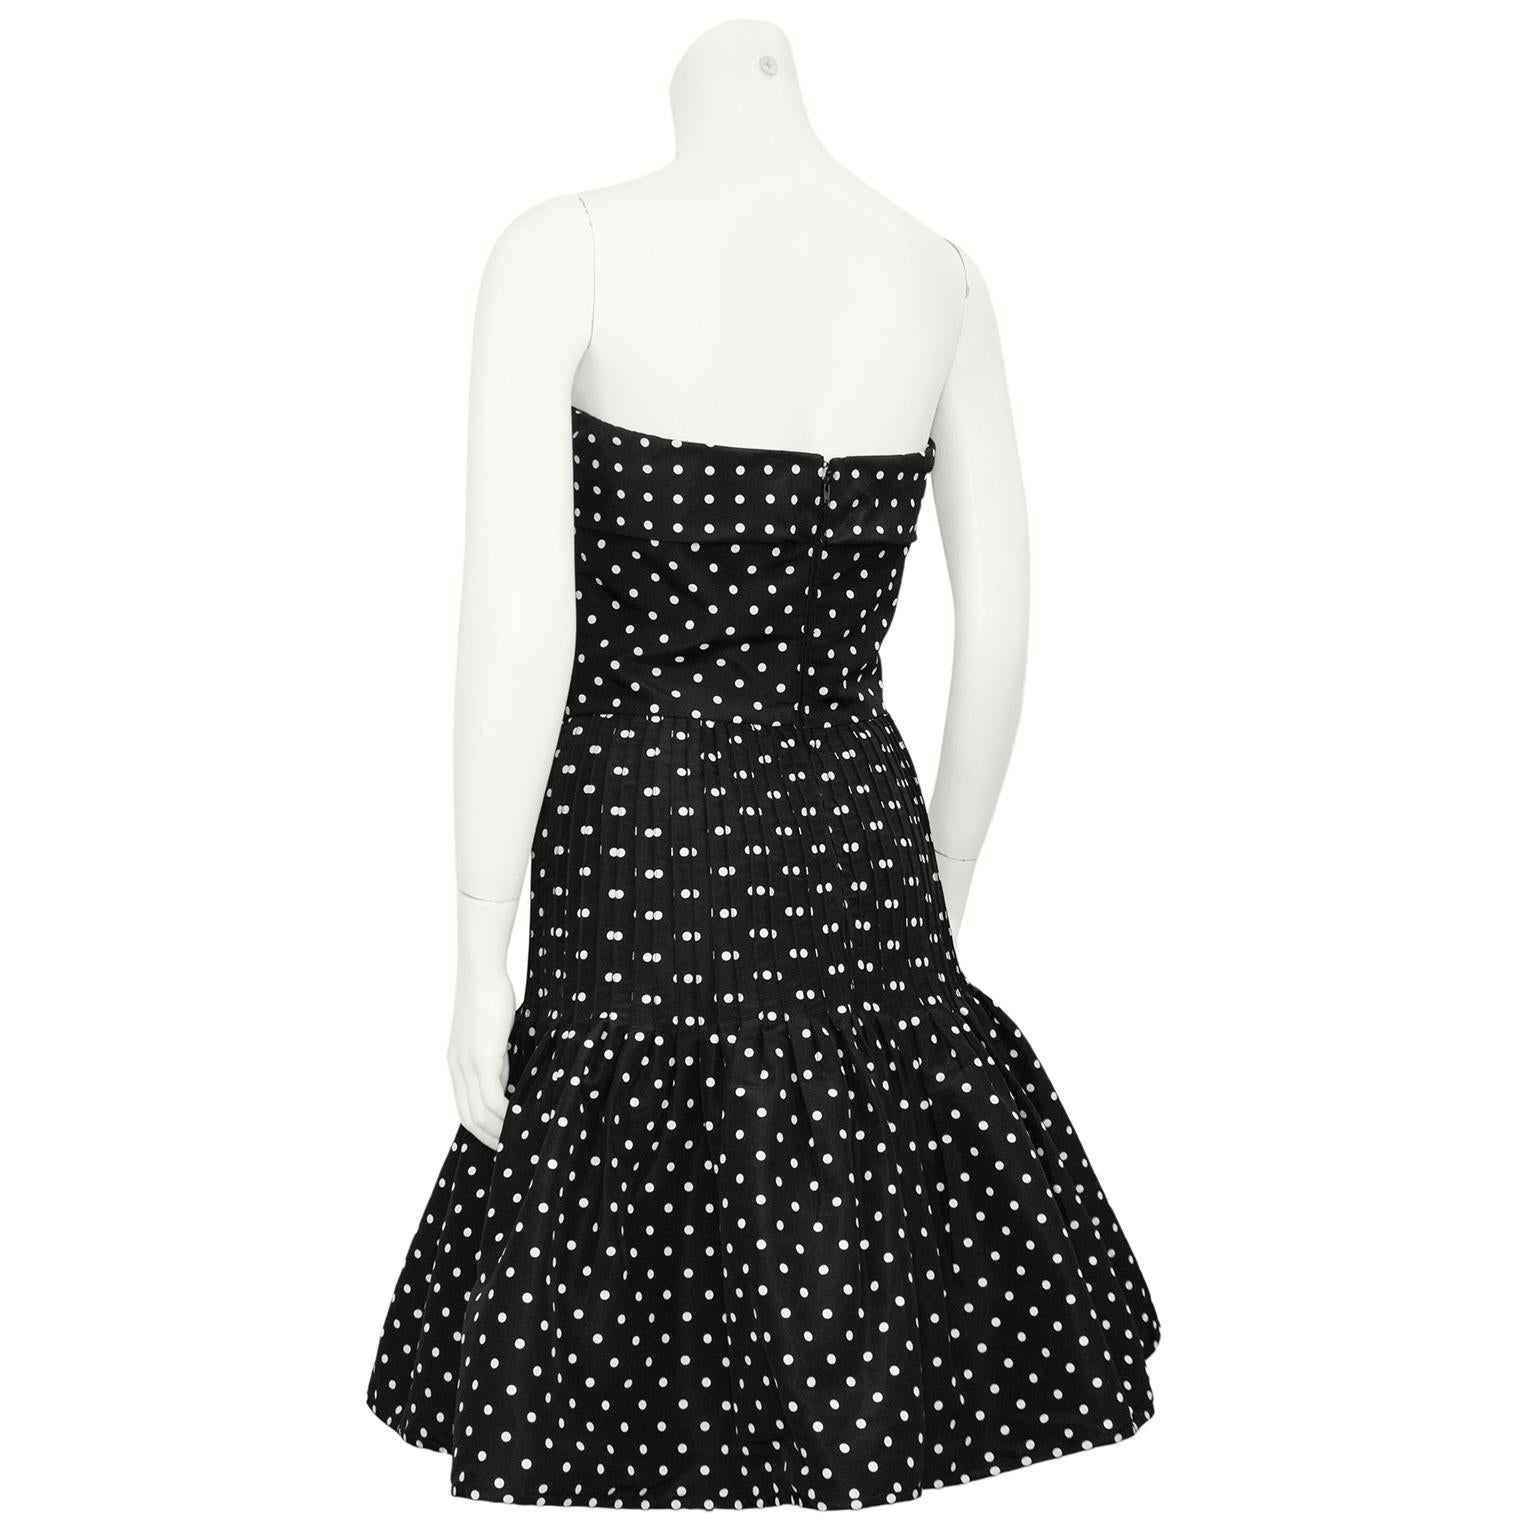 1980s Valentino Strapless Polka Dot Cocktail Dress In Good Condition For Sale In Toronto, Ontario